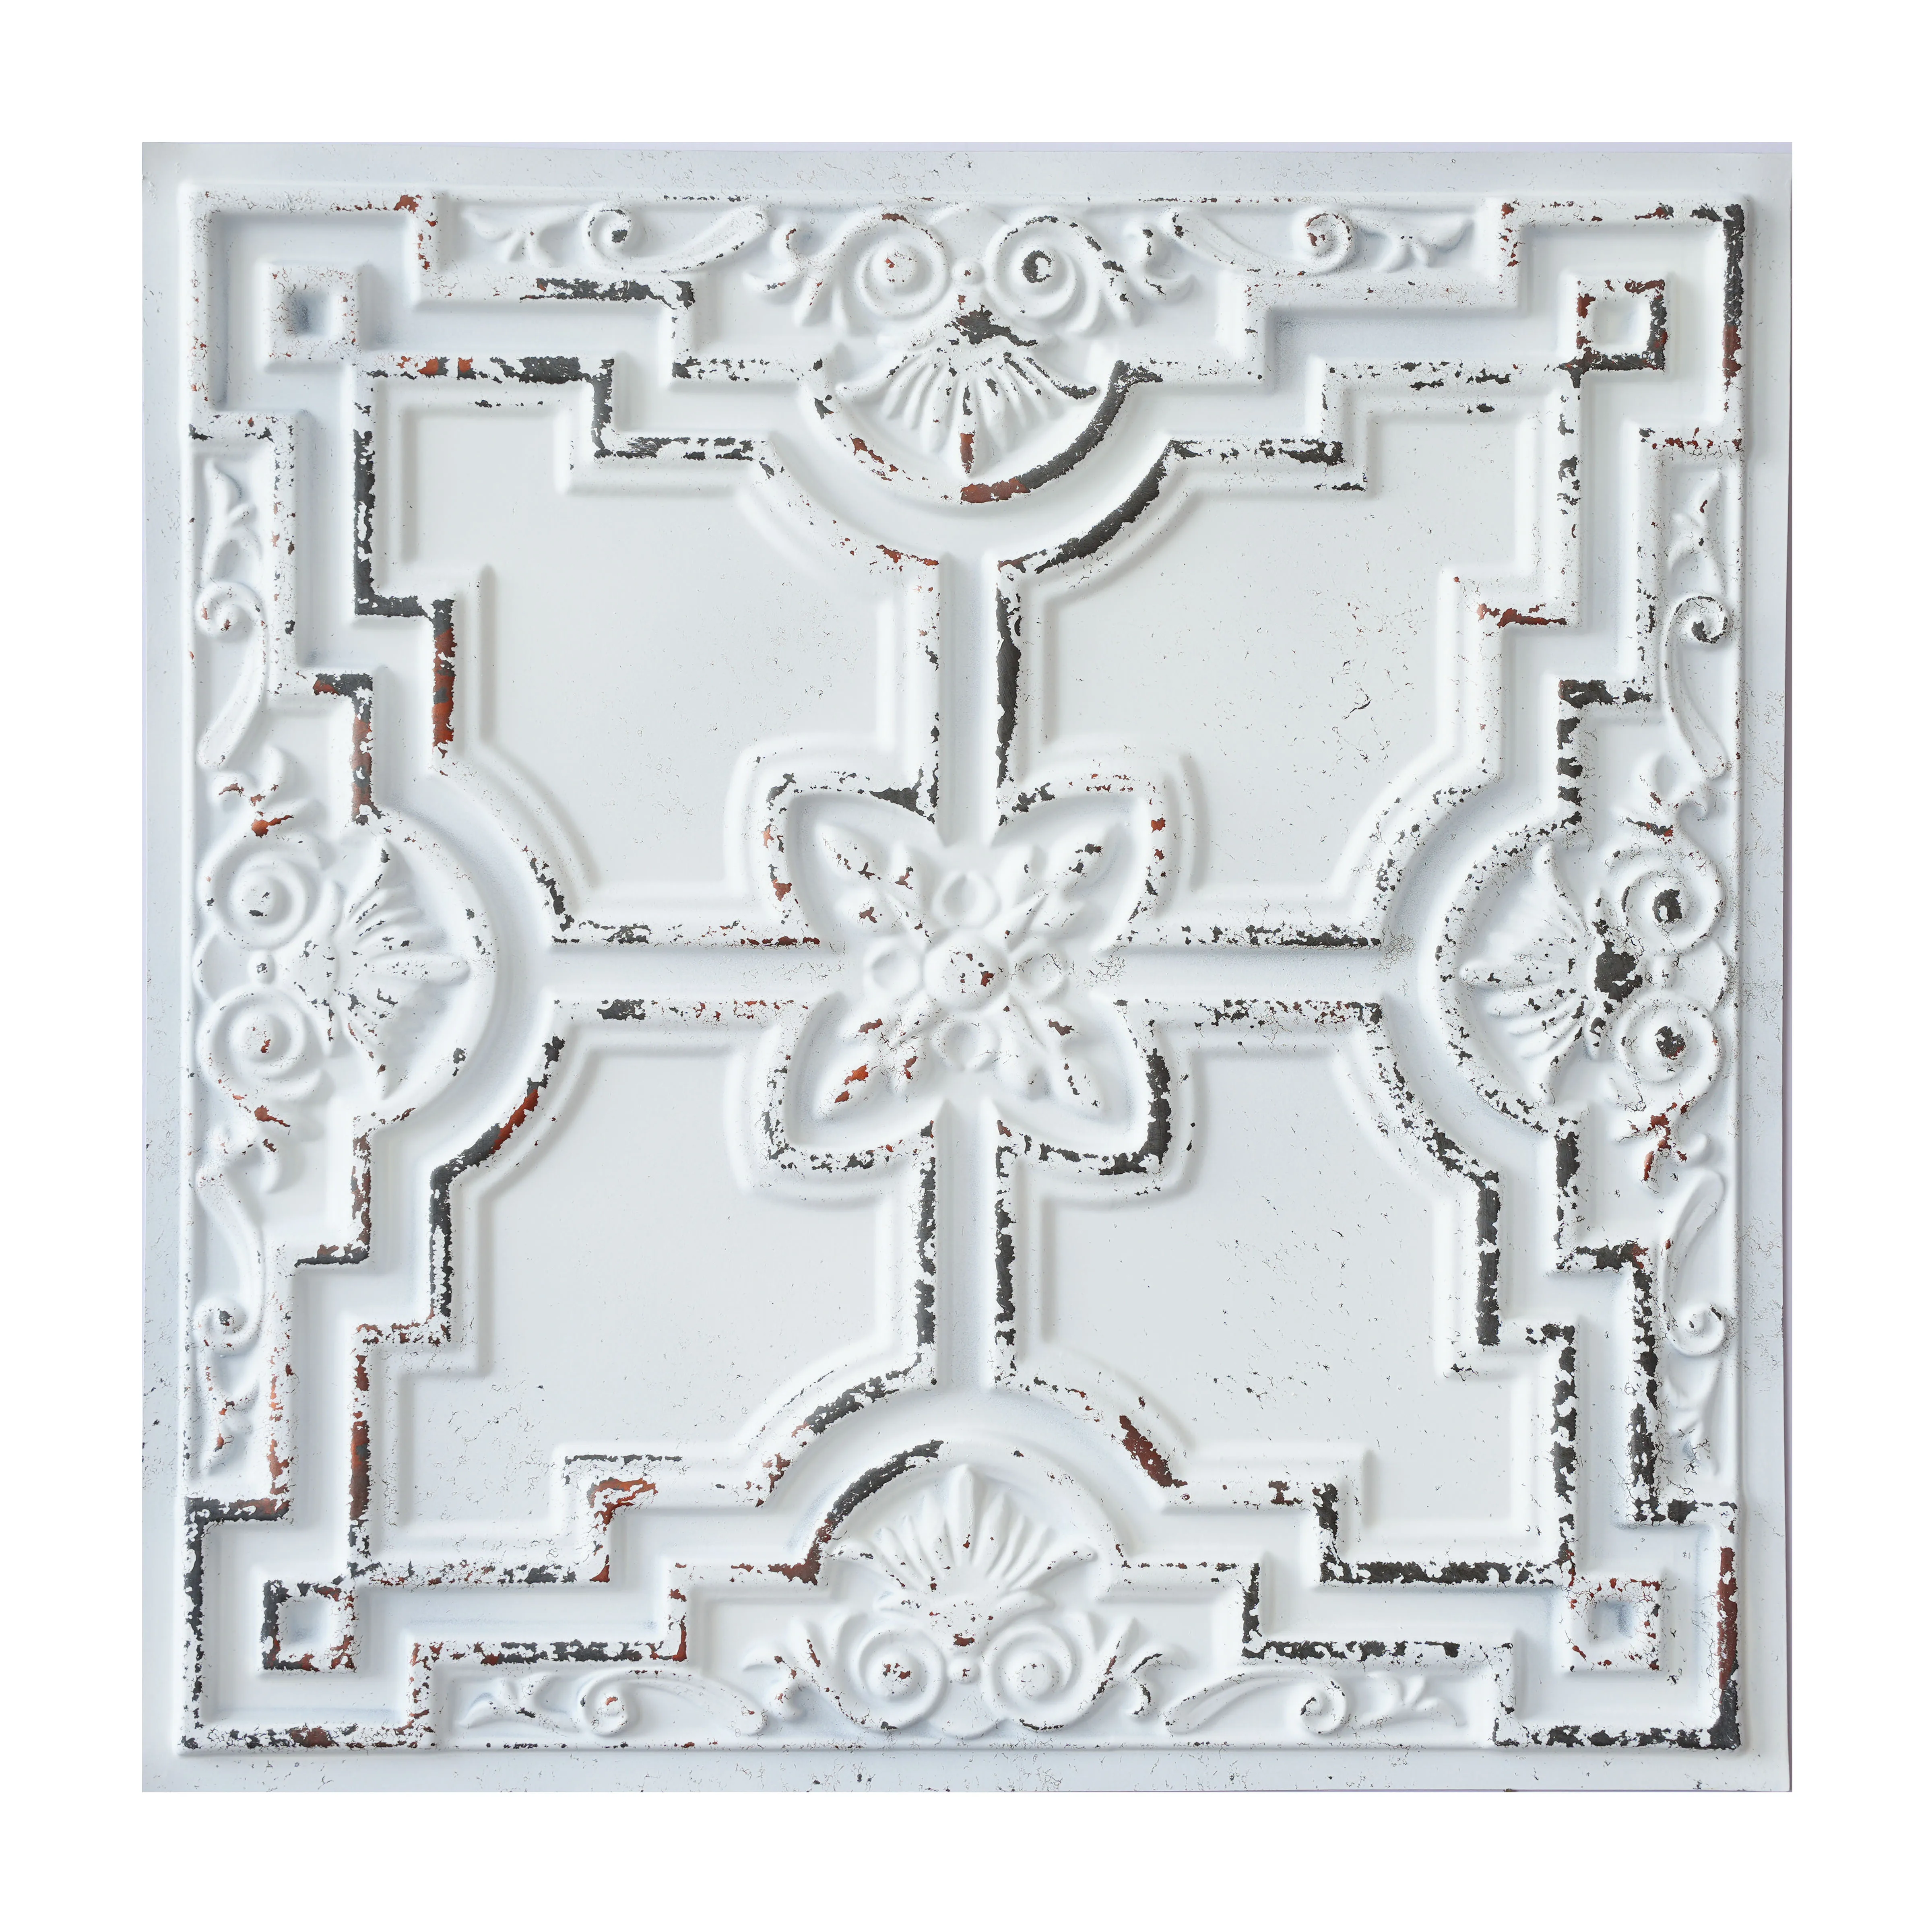 3D Stereo Embossed Panel Embossed Interior Decorative Panel Vintage Ceiling Board for Cafe Club PL16 Distress crack white black